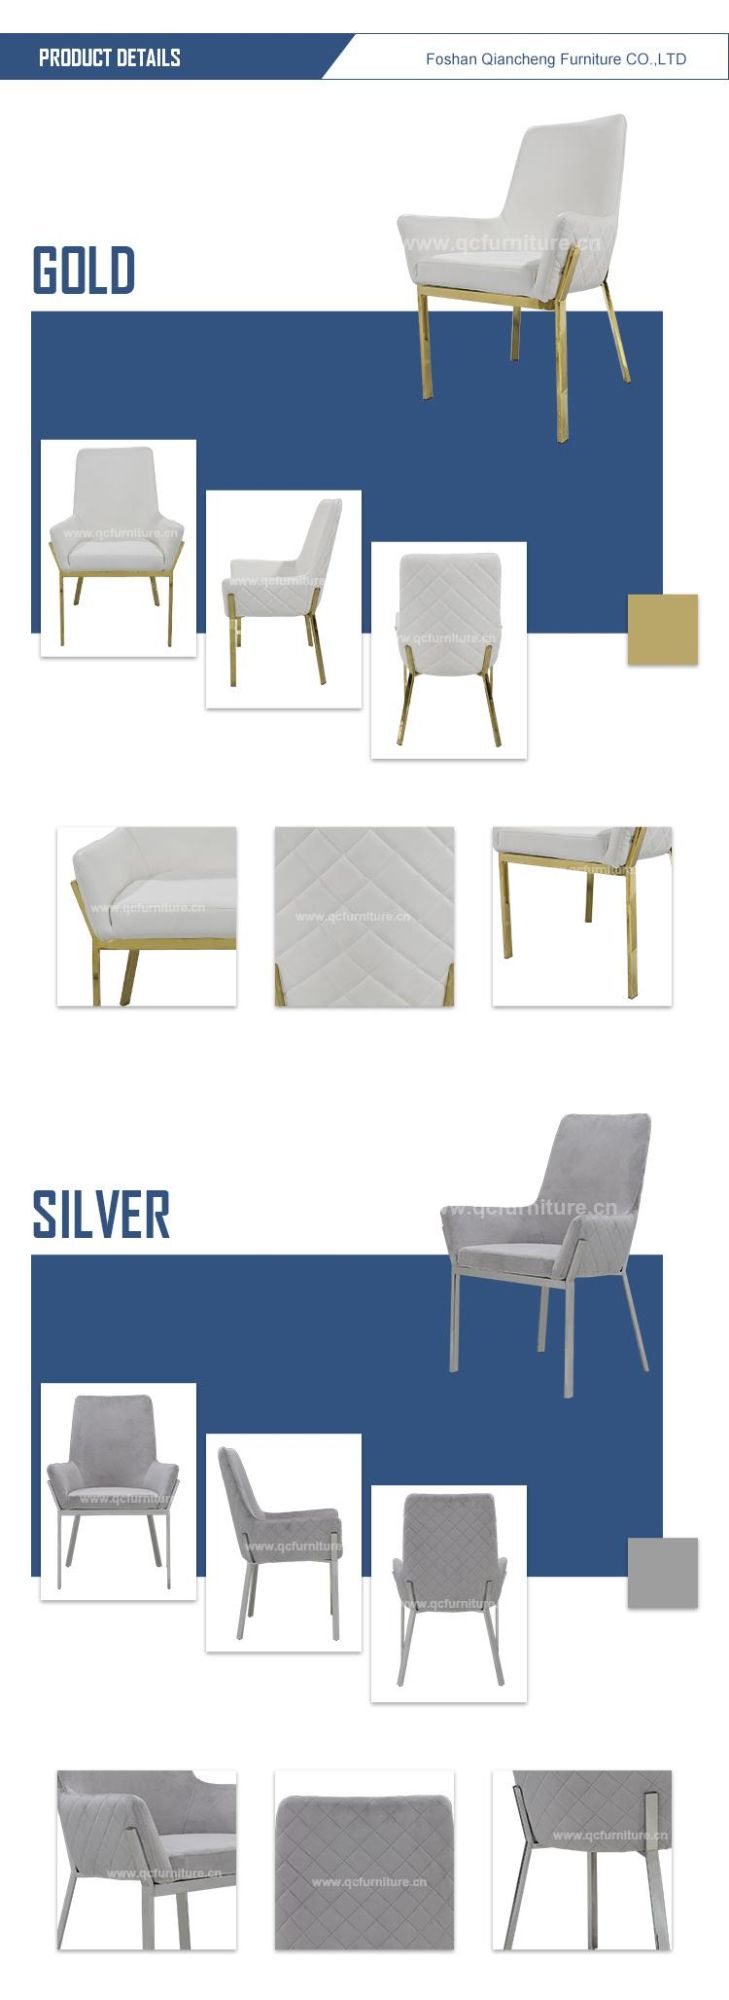 Modern Stainless Steel Fabric/PU Cover Dining Chair